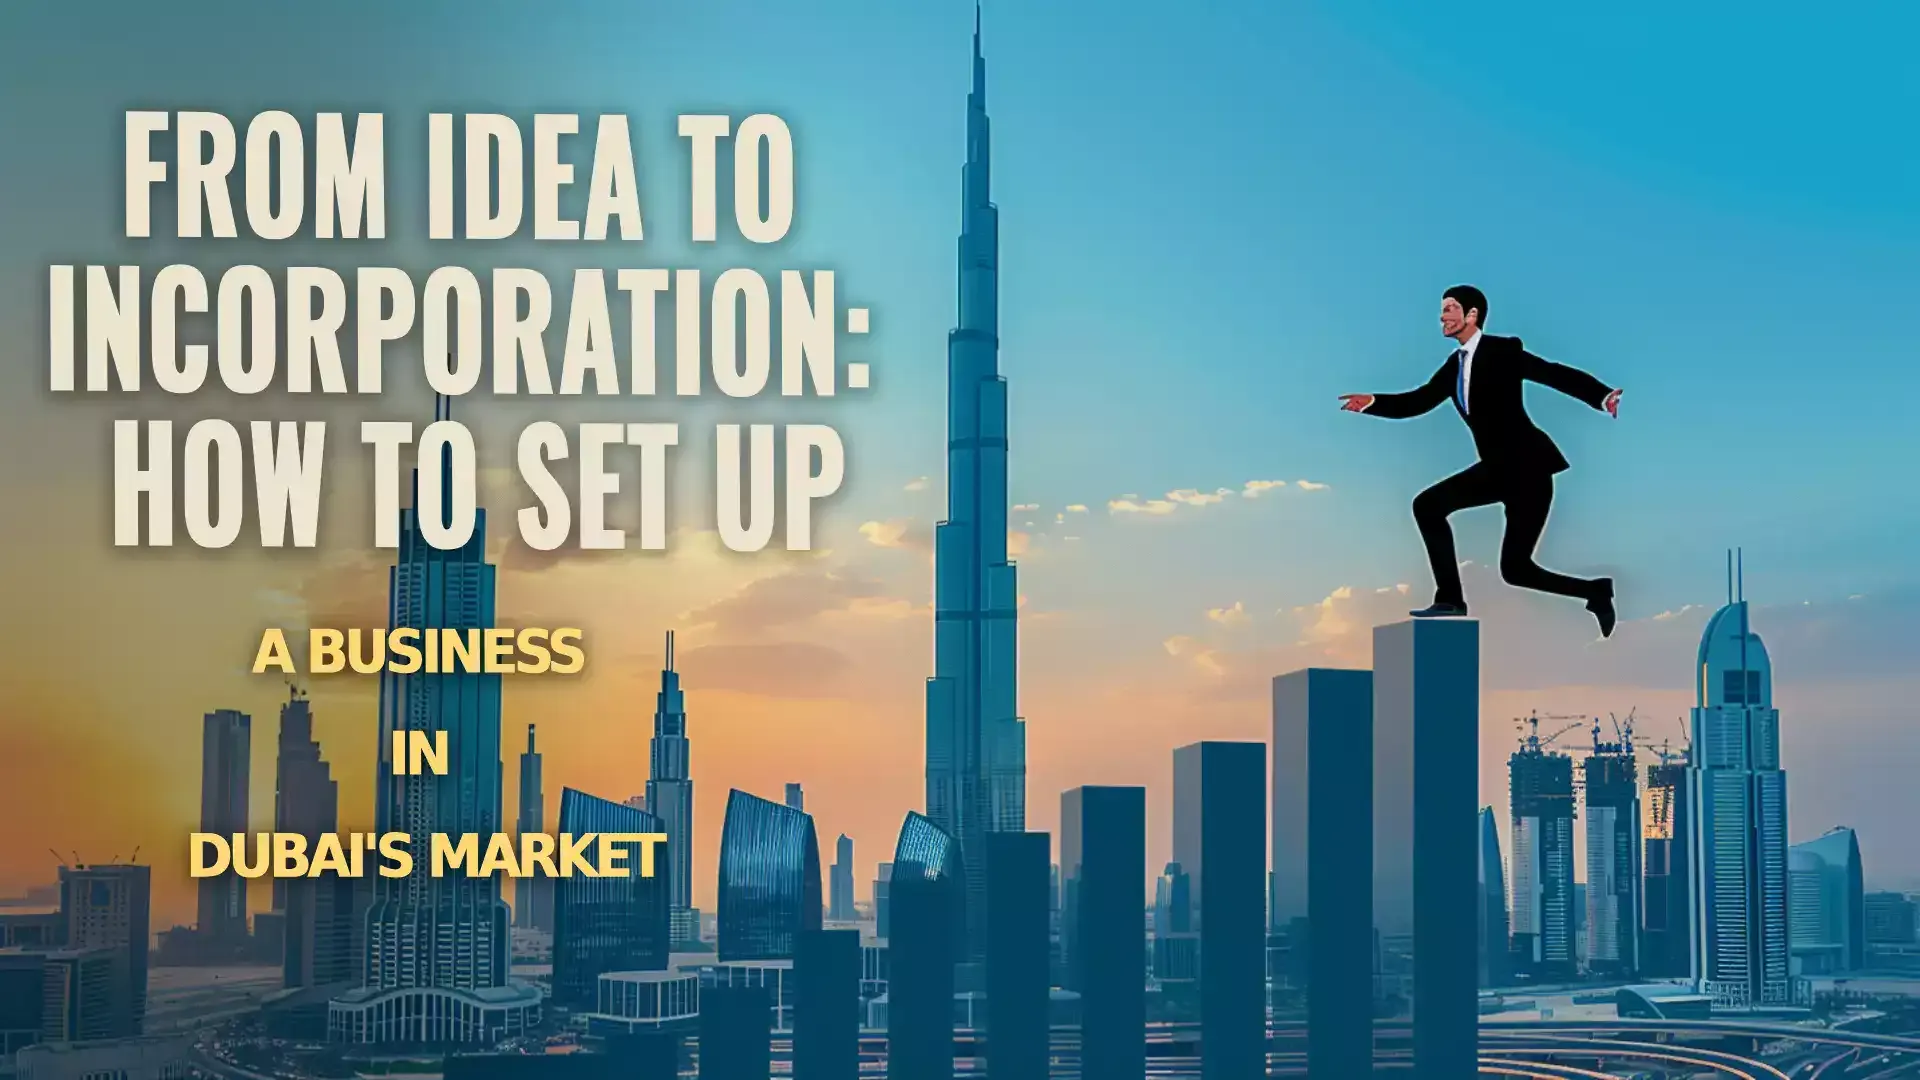 Illustration: Process of Setting Up a Business in Dubai